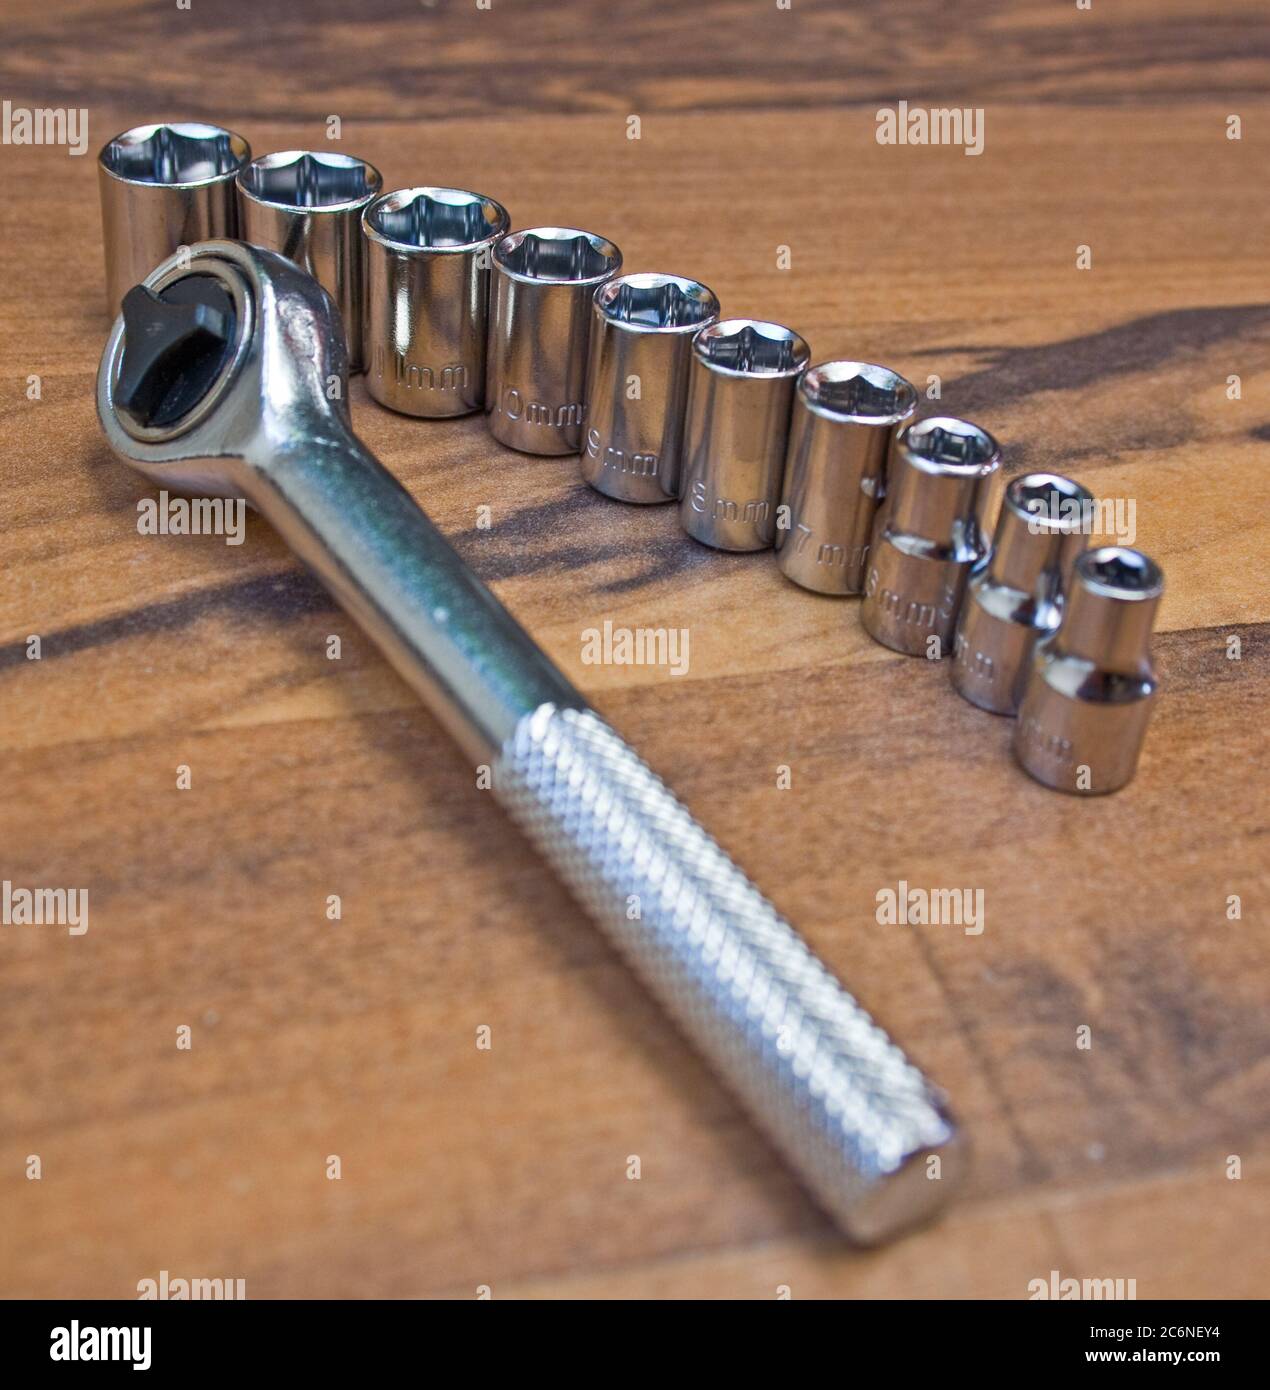 Key set with screwdriver and sockets Stock Photo